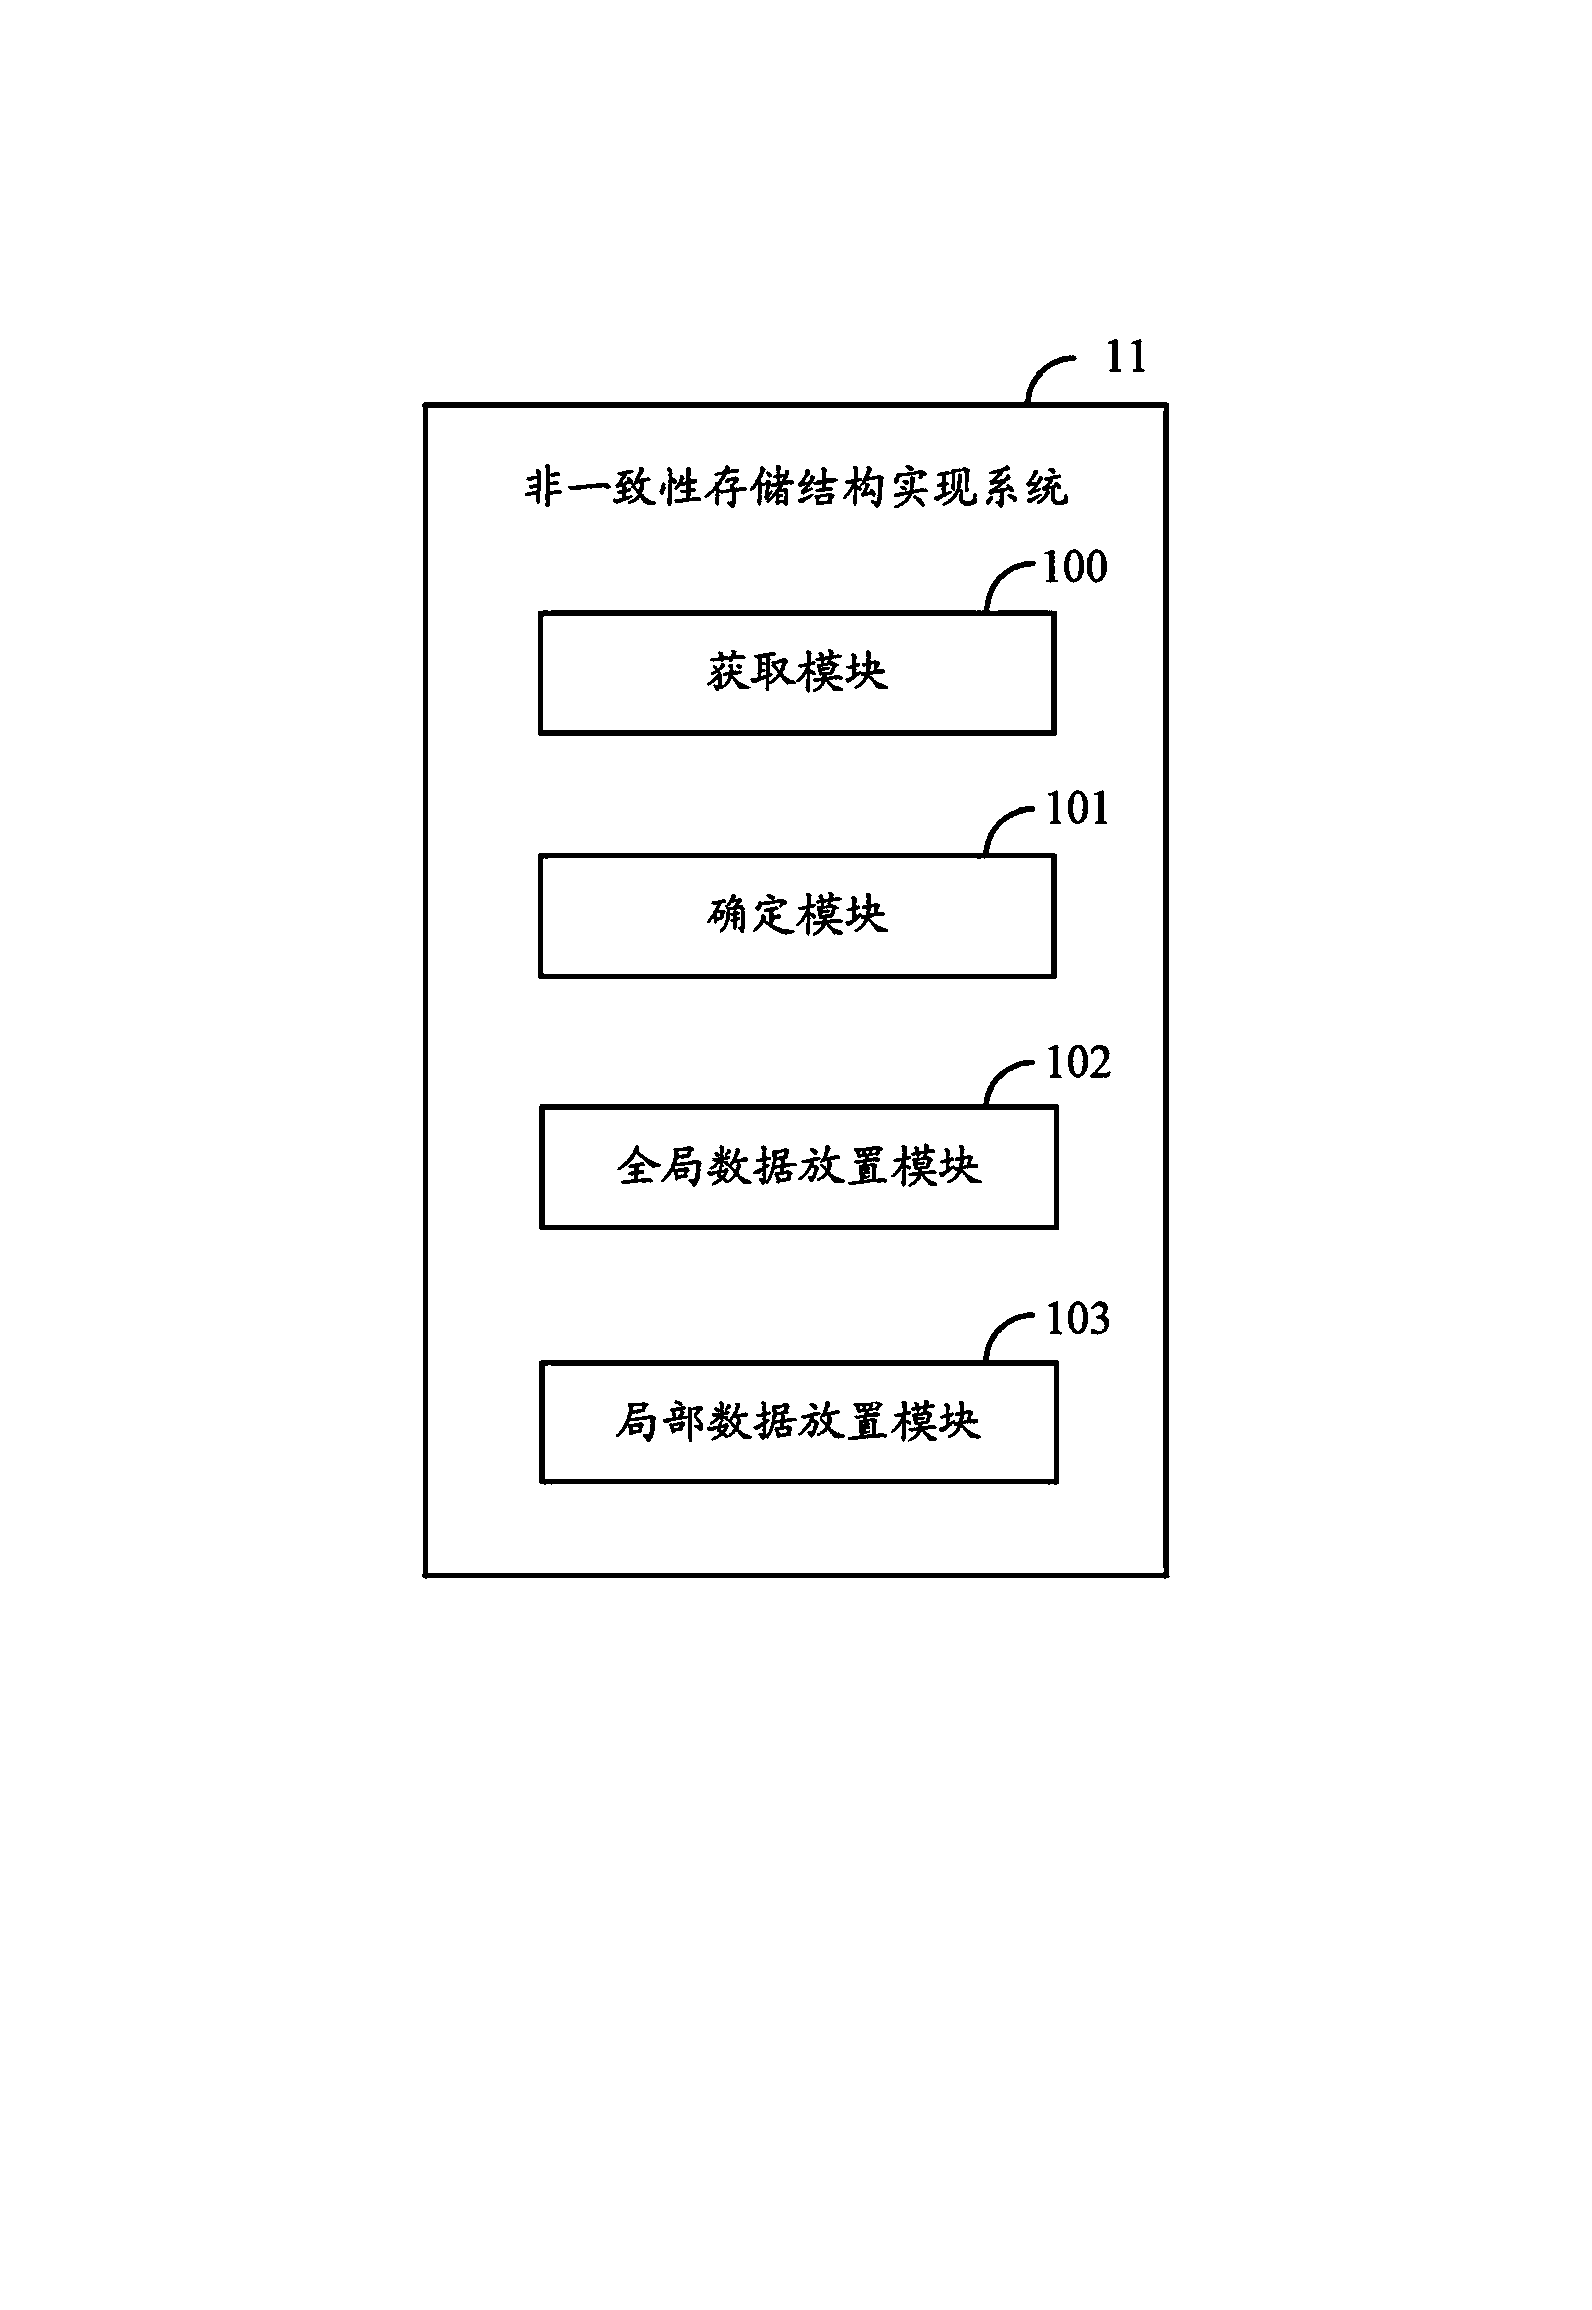 Implementation method and system for non-consistent storage structure